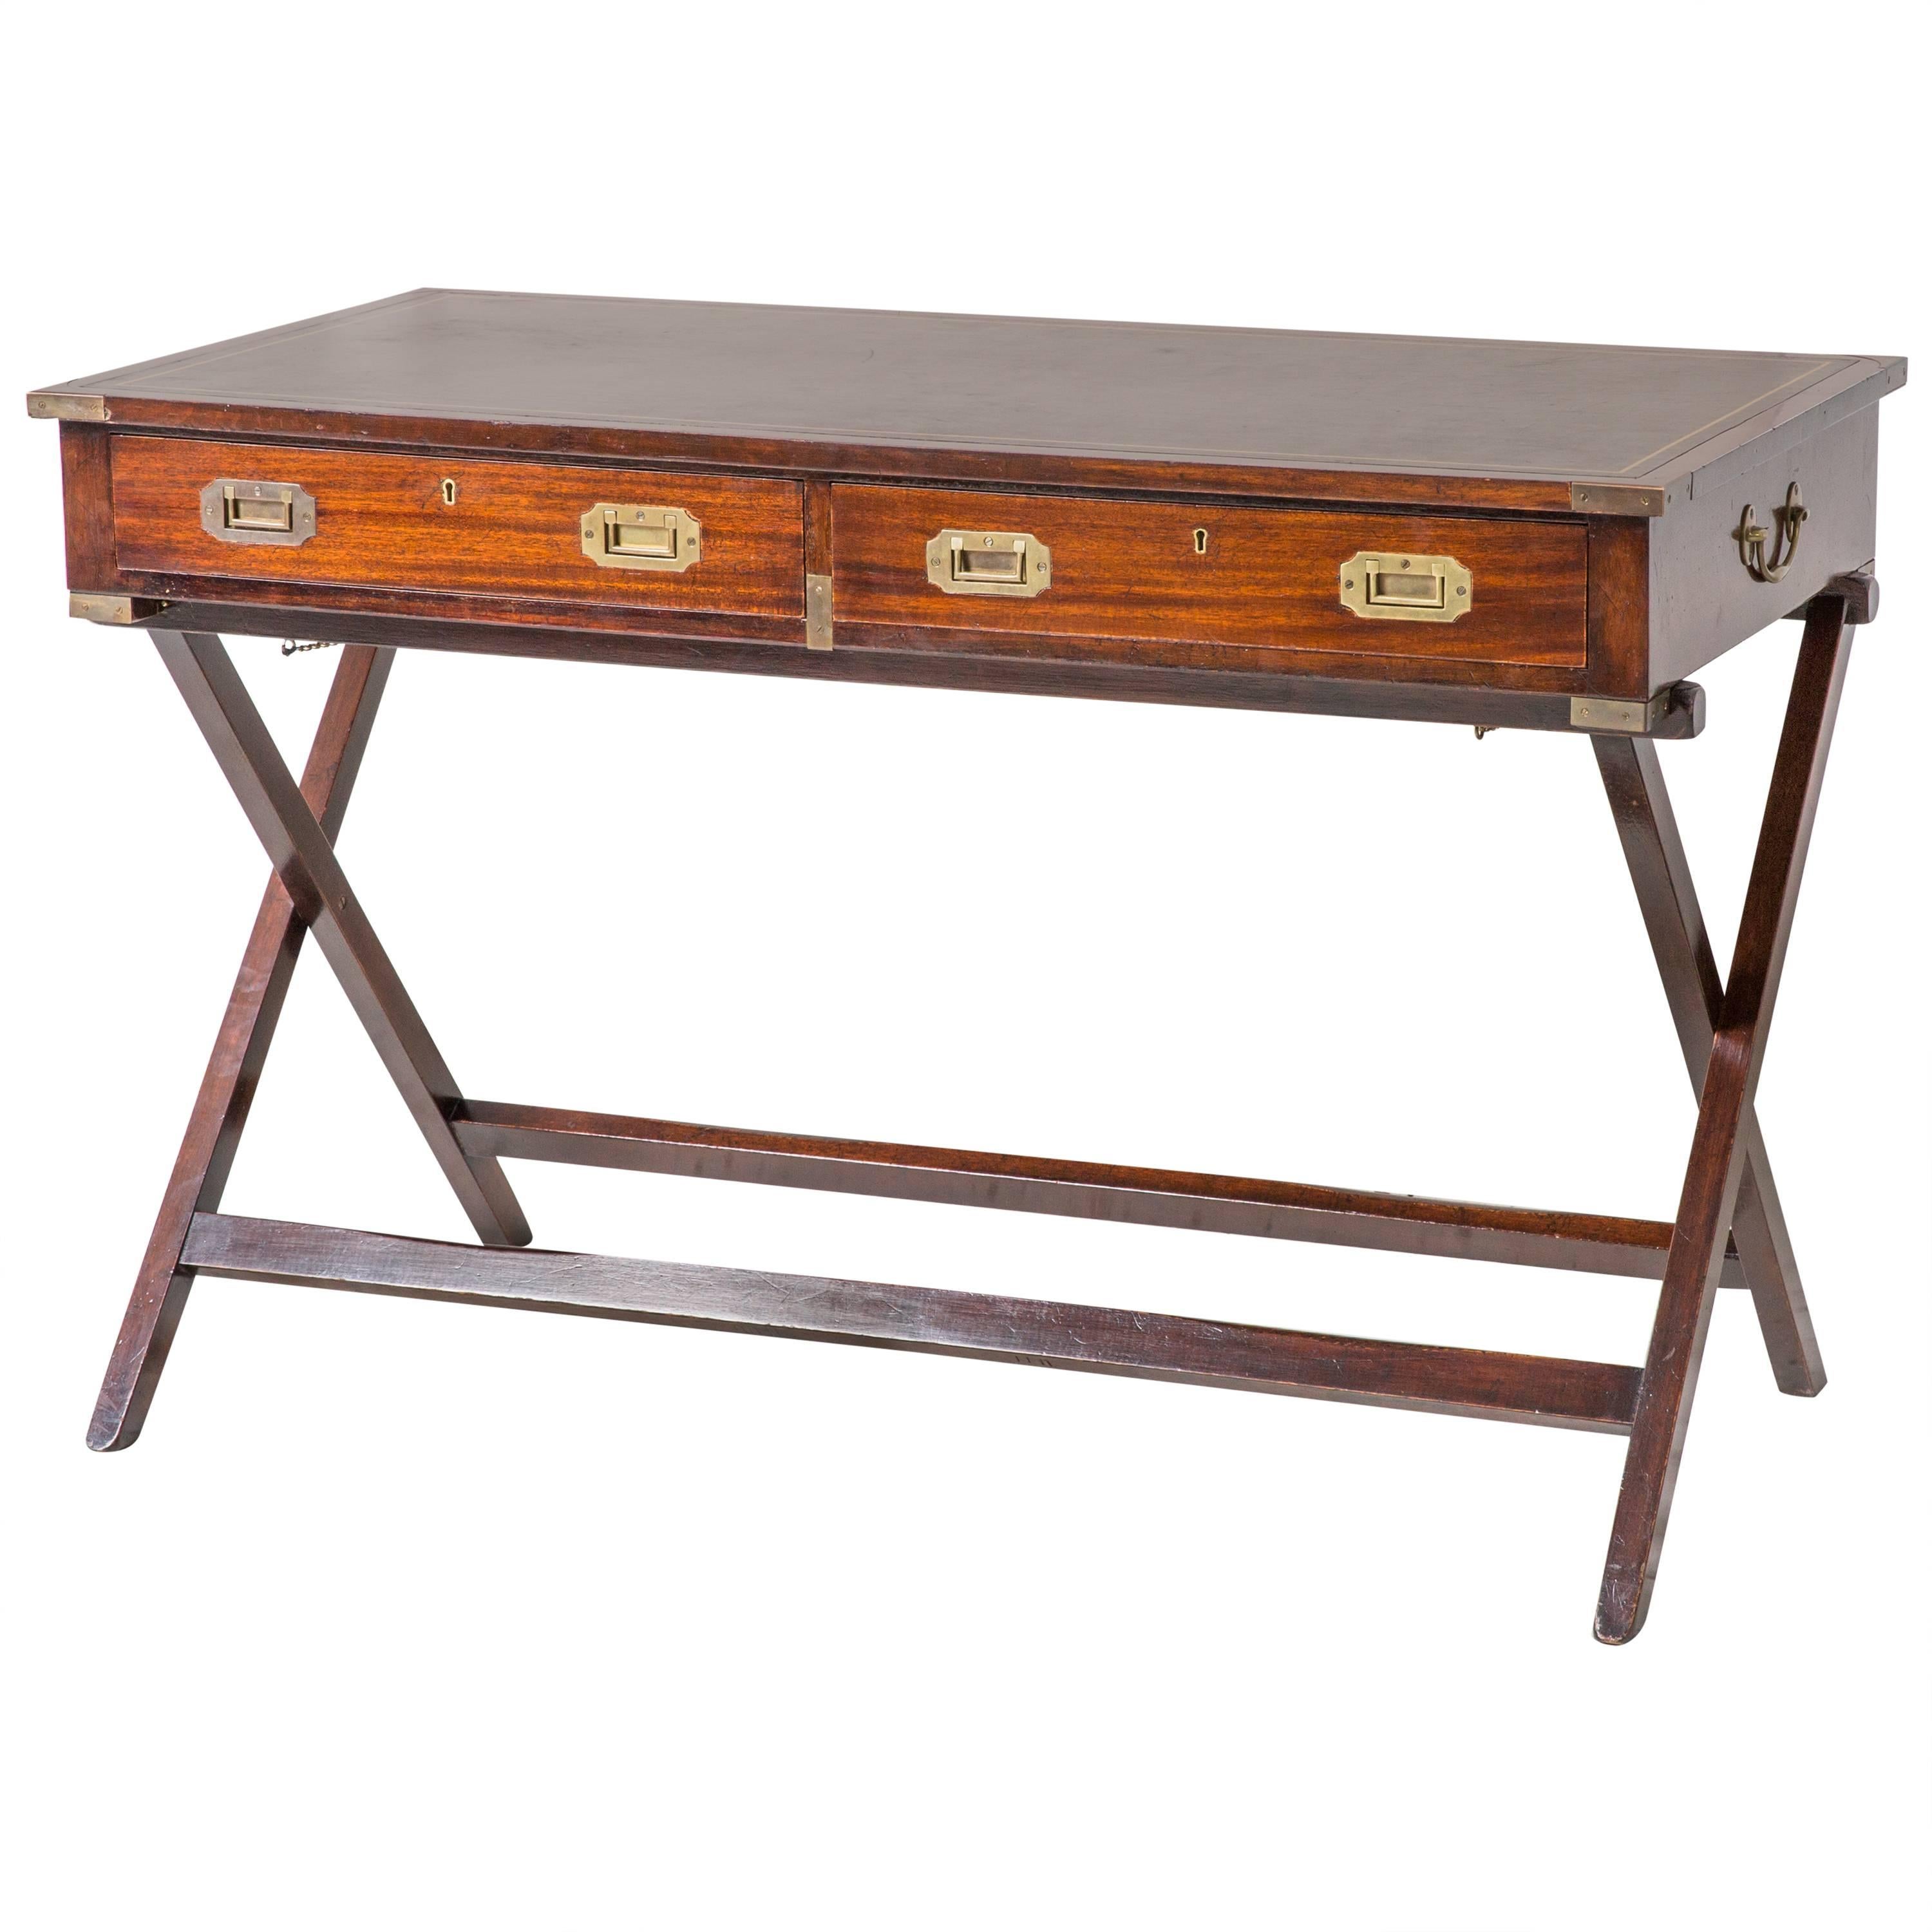 Campaign Style Desk with Leather Inset